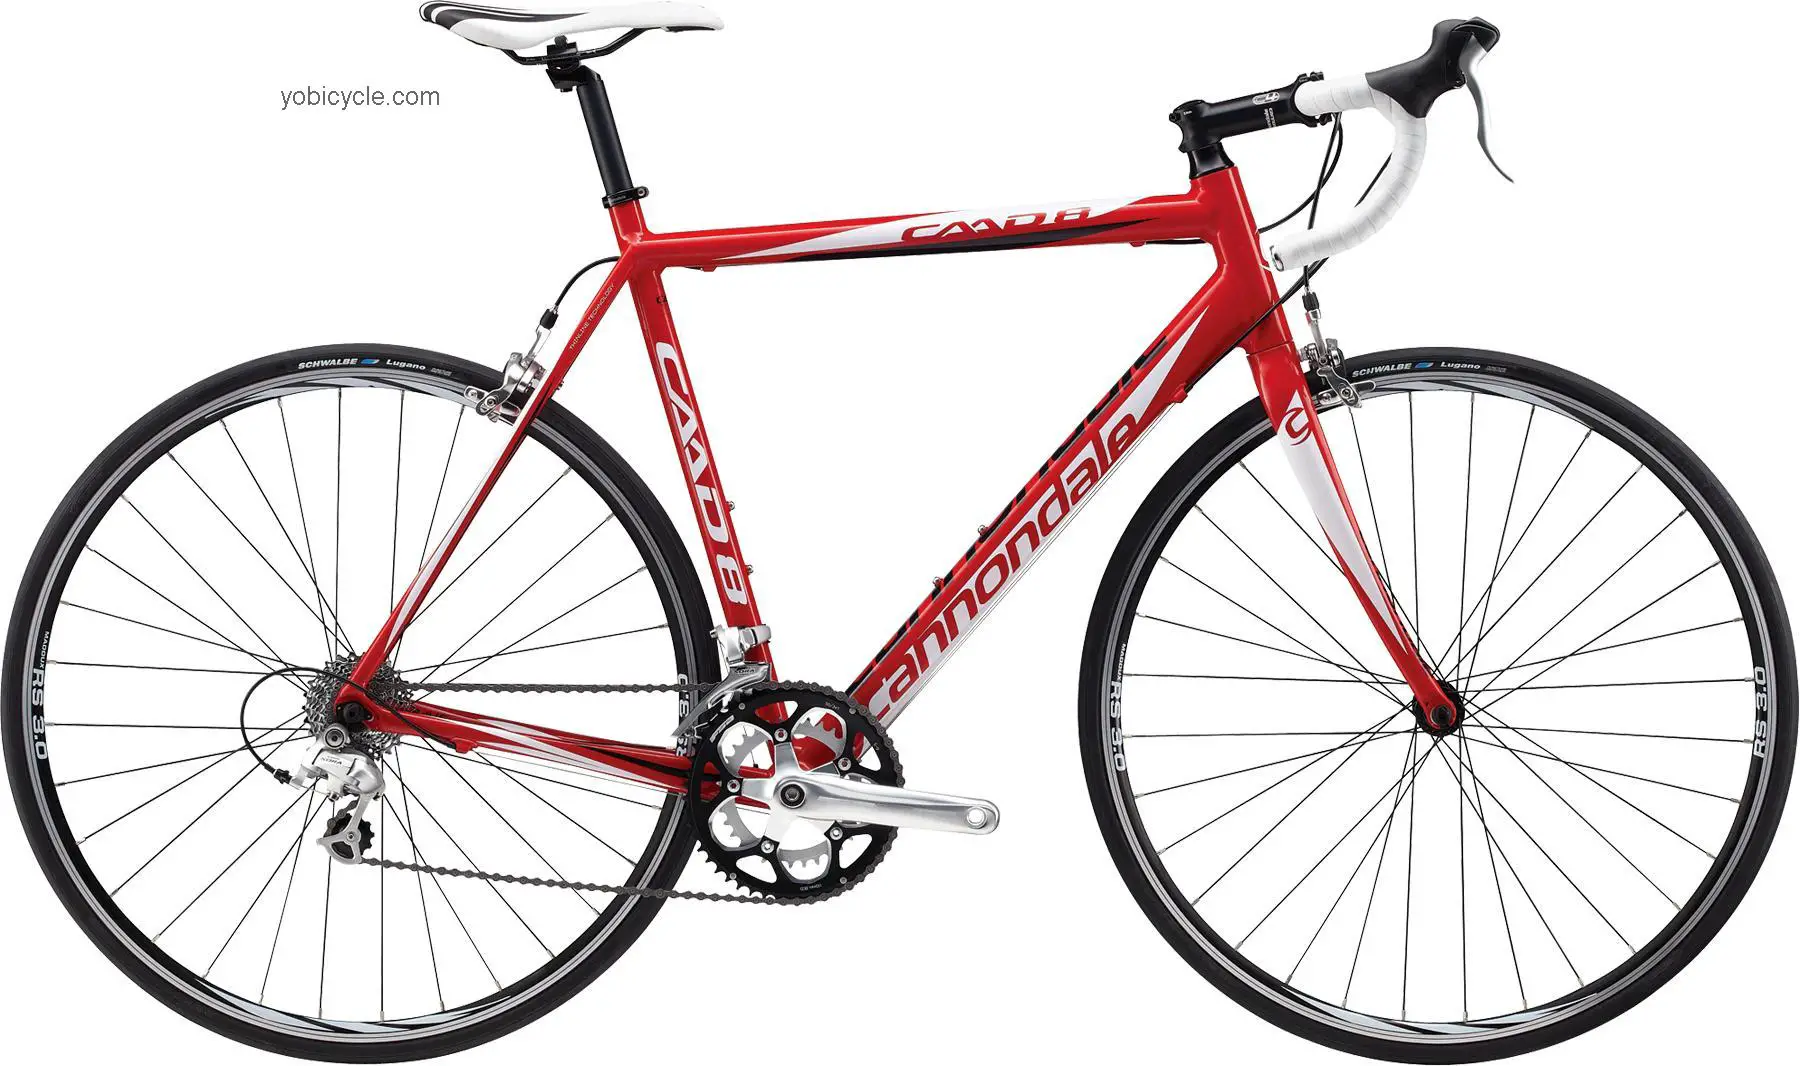 Cannondale CAAD8 7 Sora 2012 comparison online with competitors